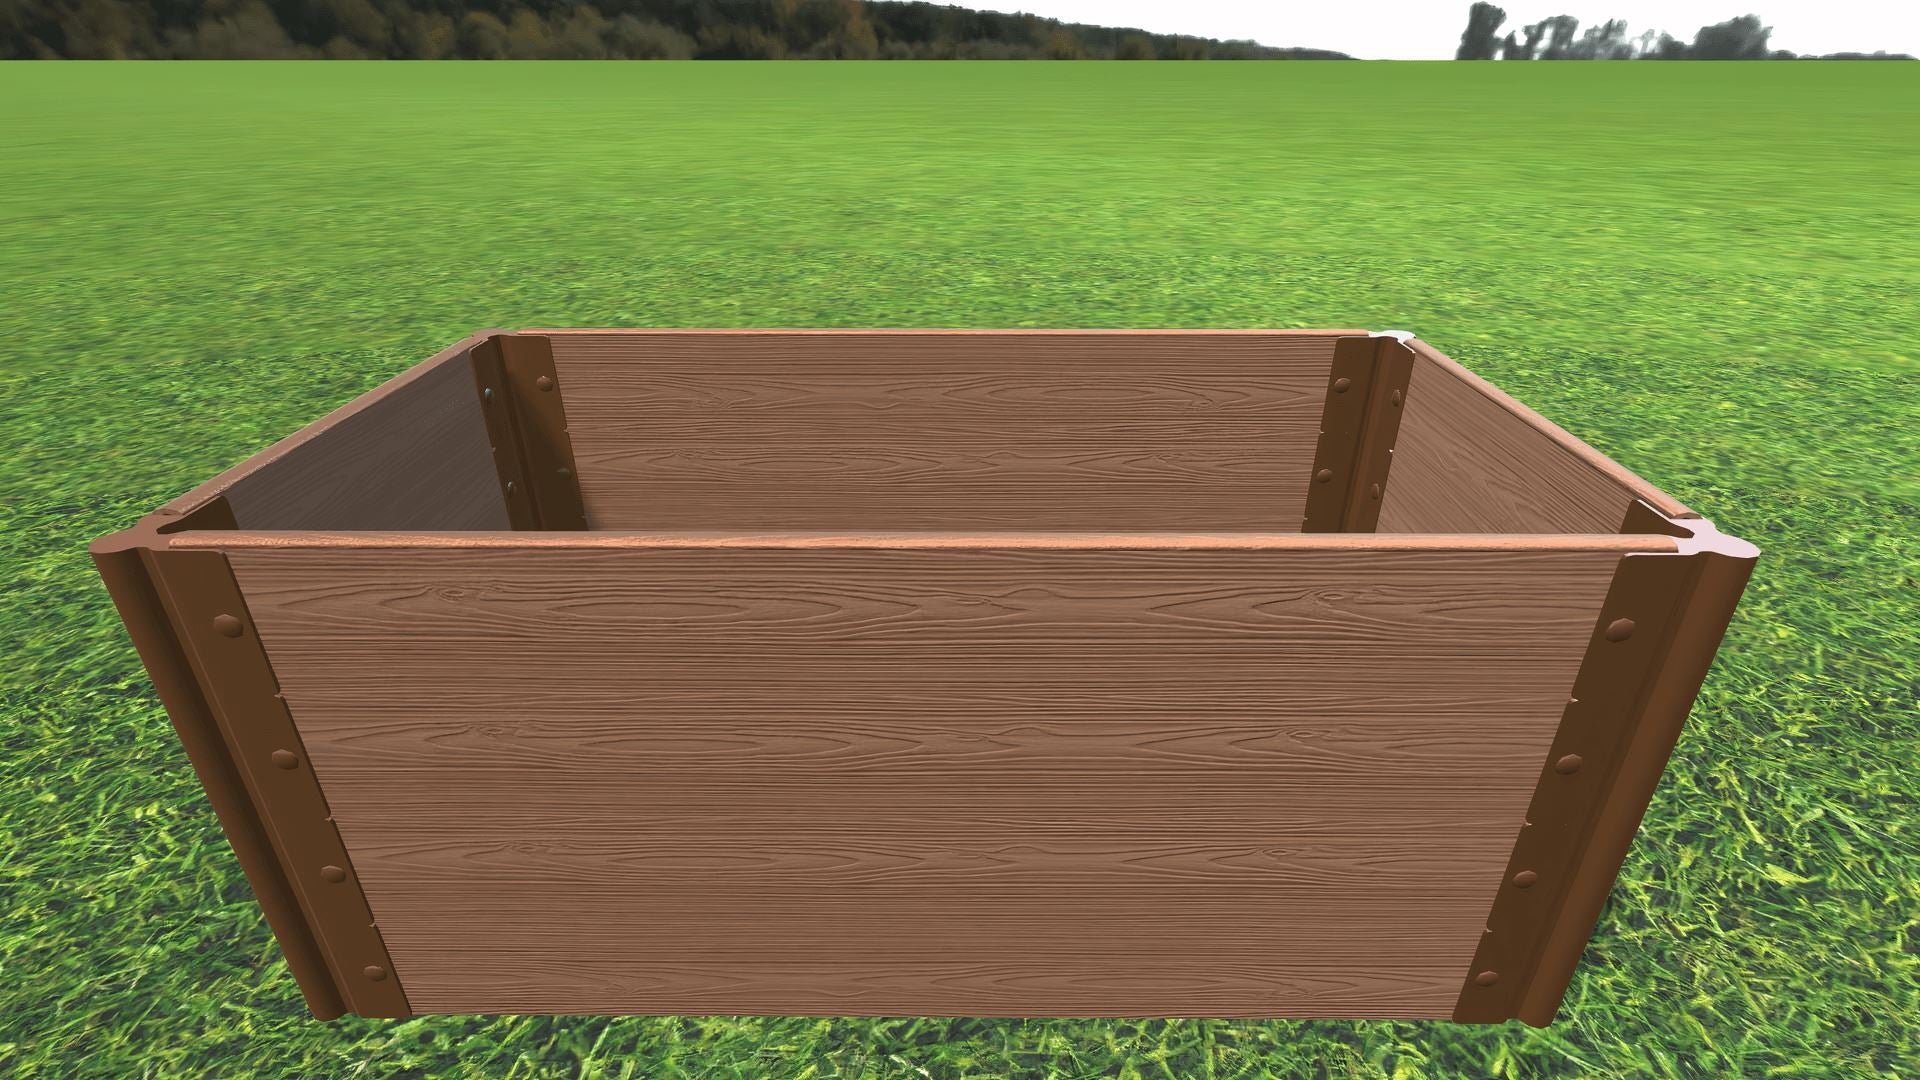 Tool-Free 2' x 4' Raised Garden Bed Raised Bed Planters Frame It All Classic Sienna 1'' 4 = 22"